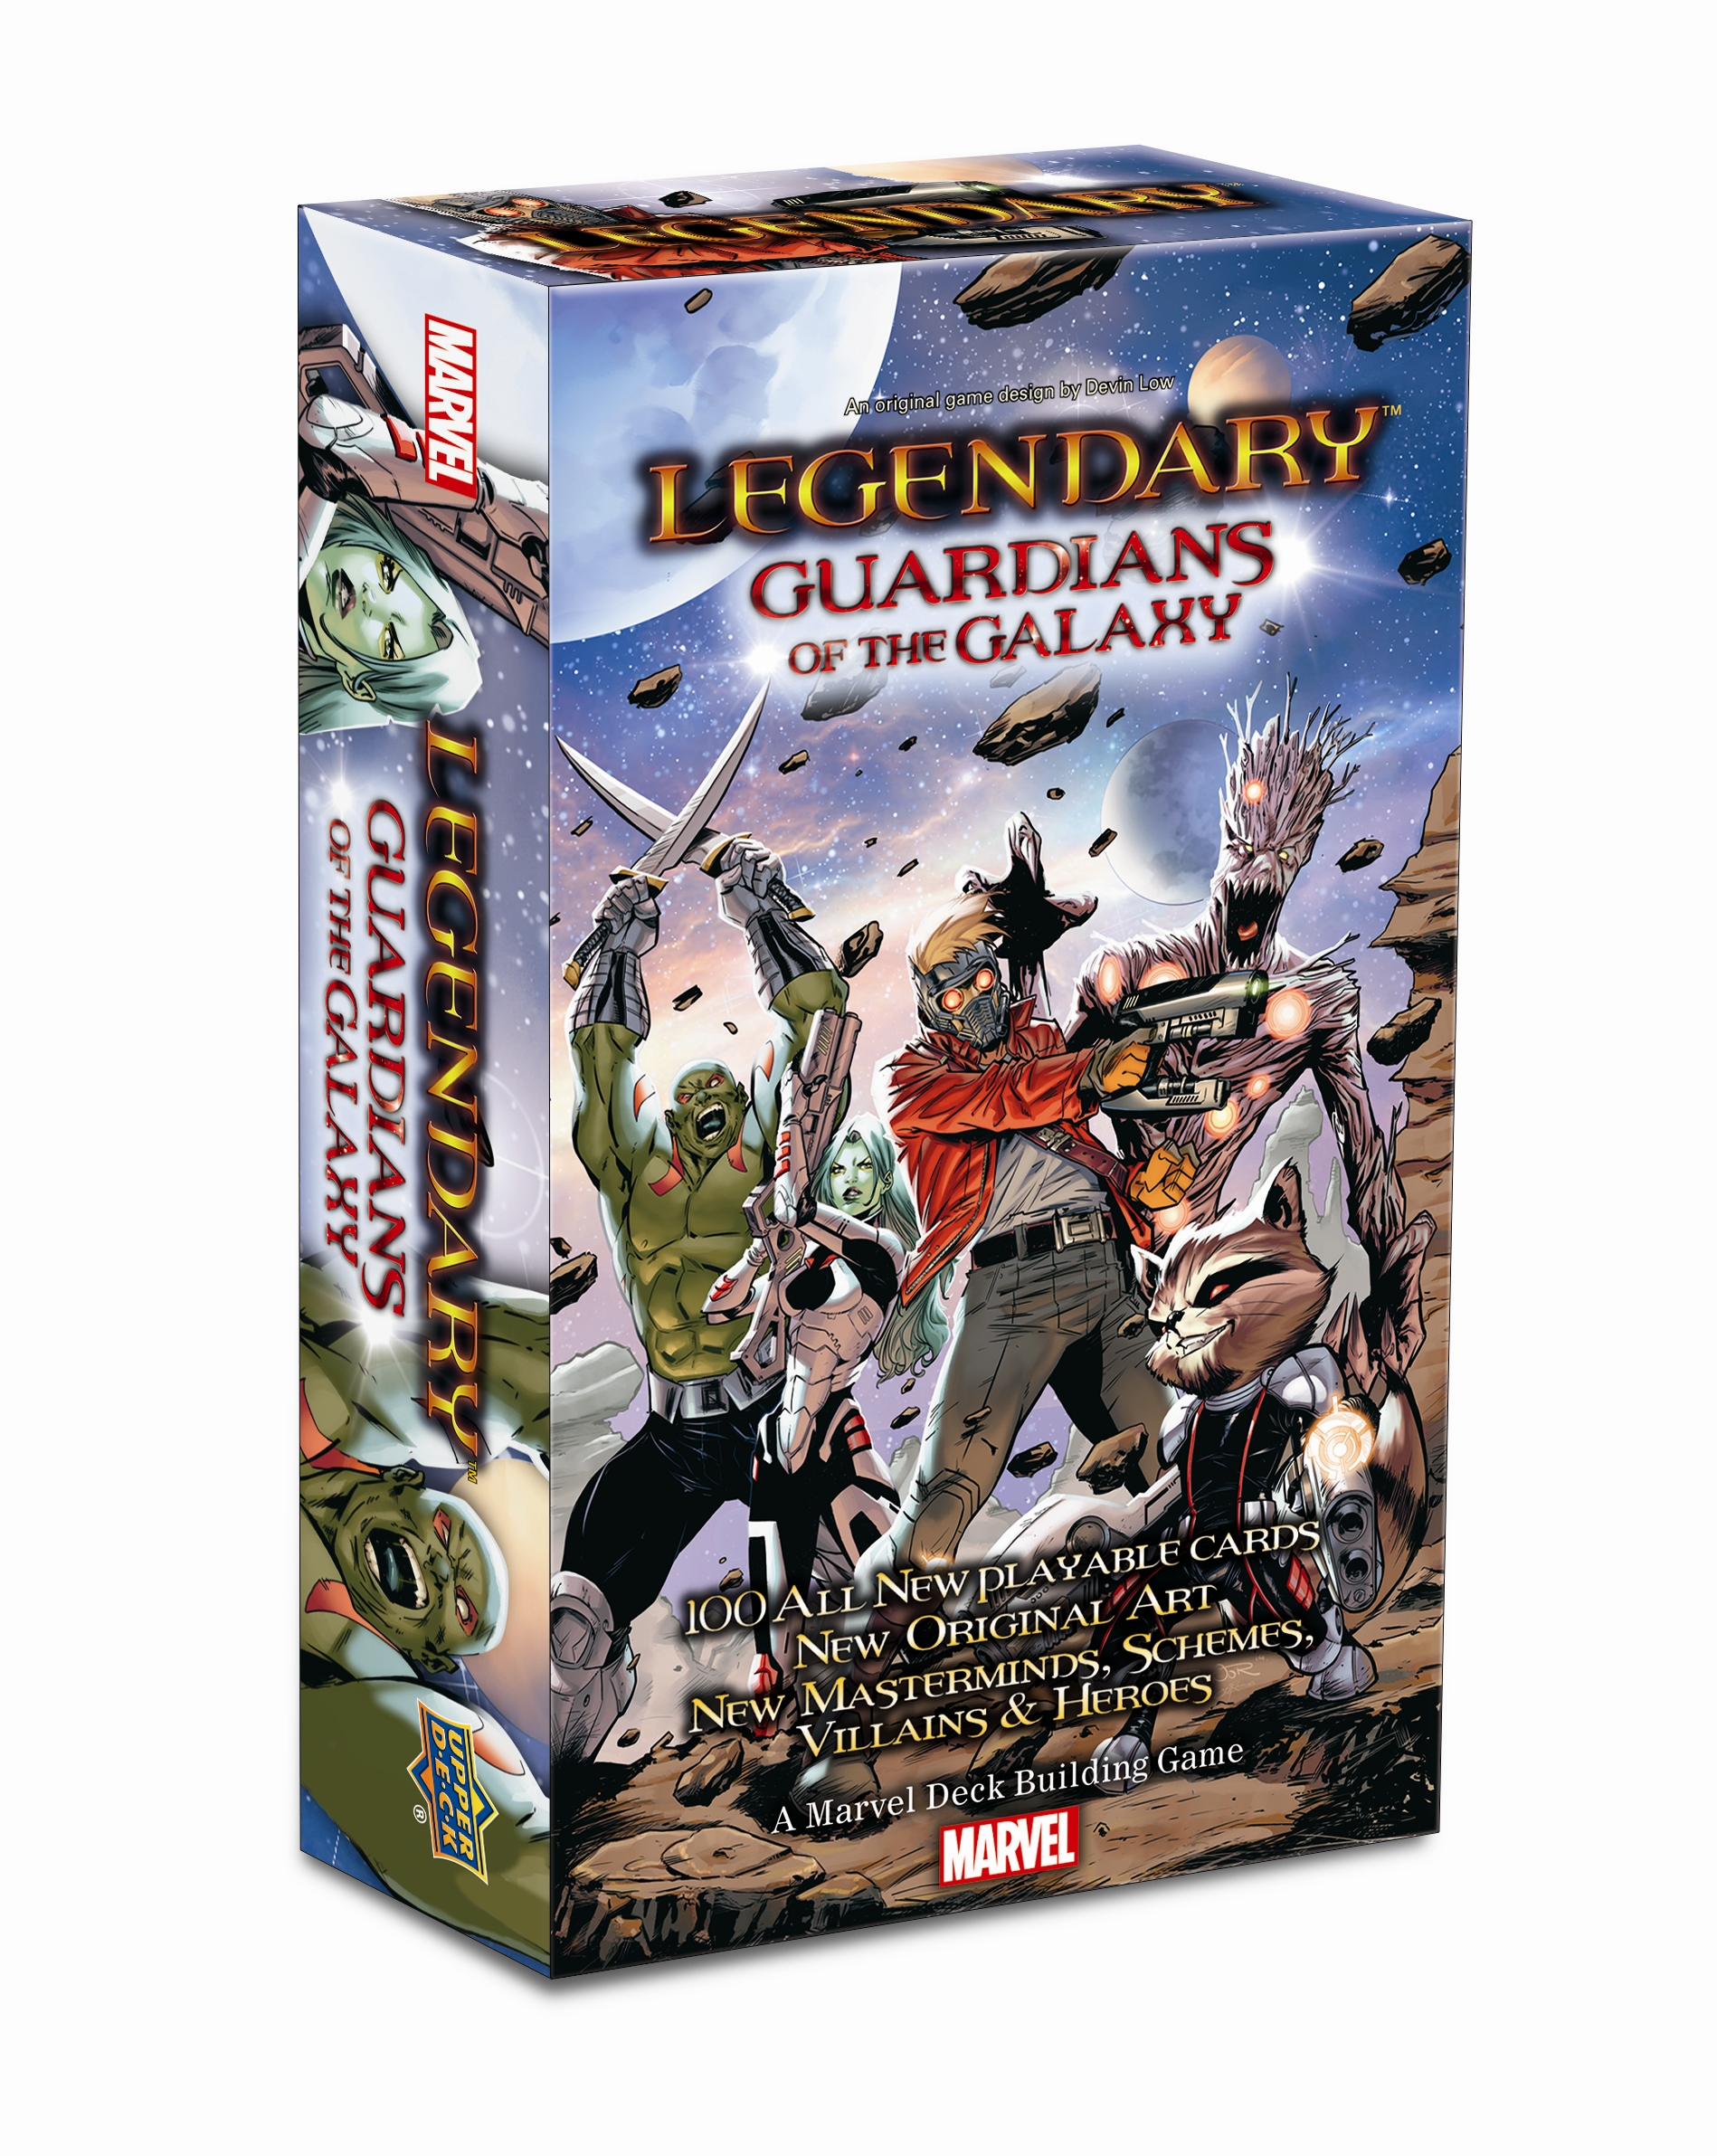 Marvel Legendary Guardians of the Galaxy